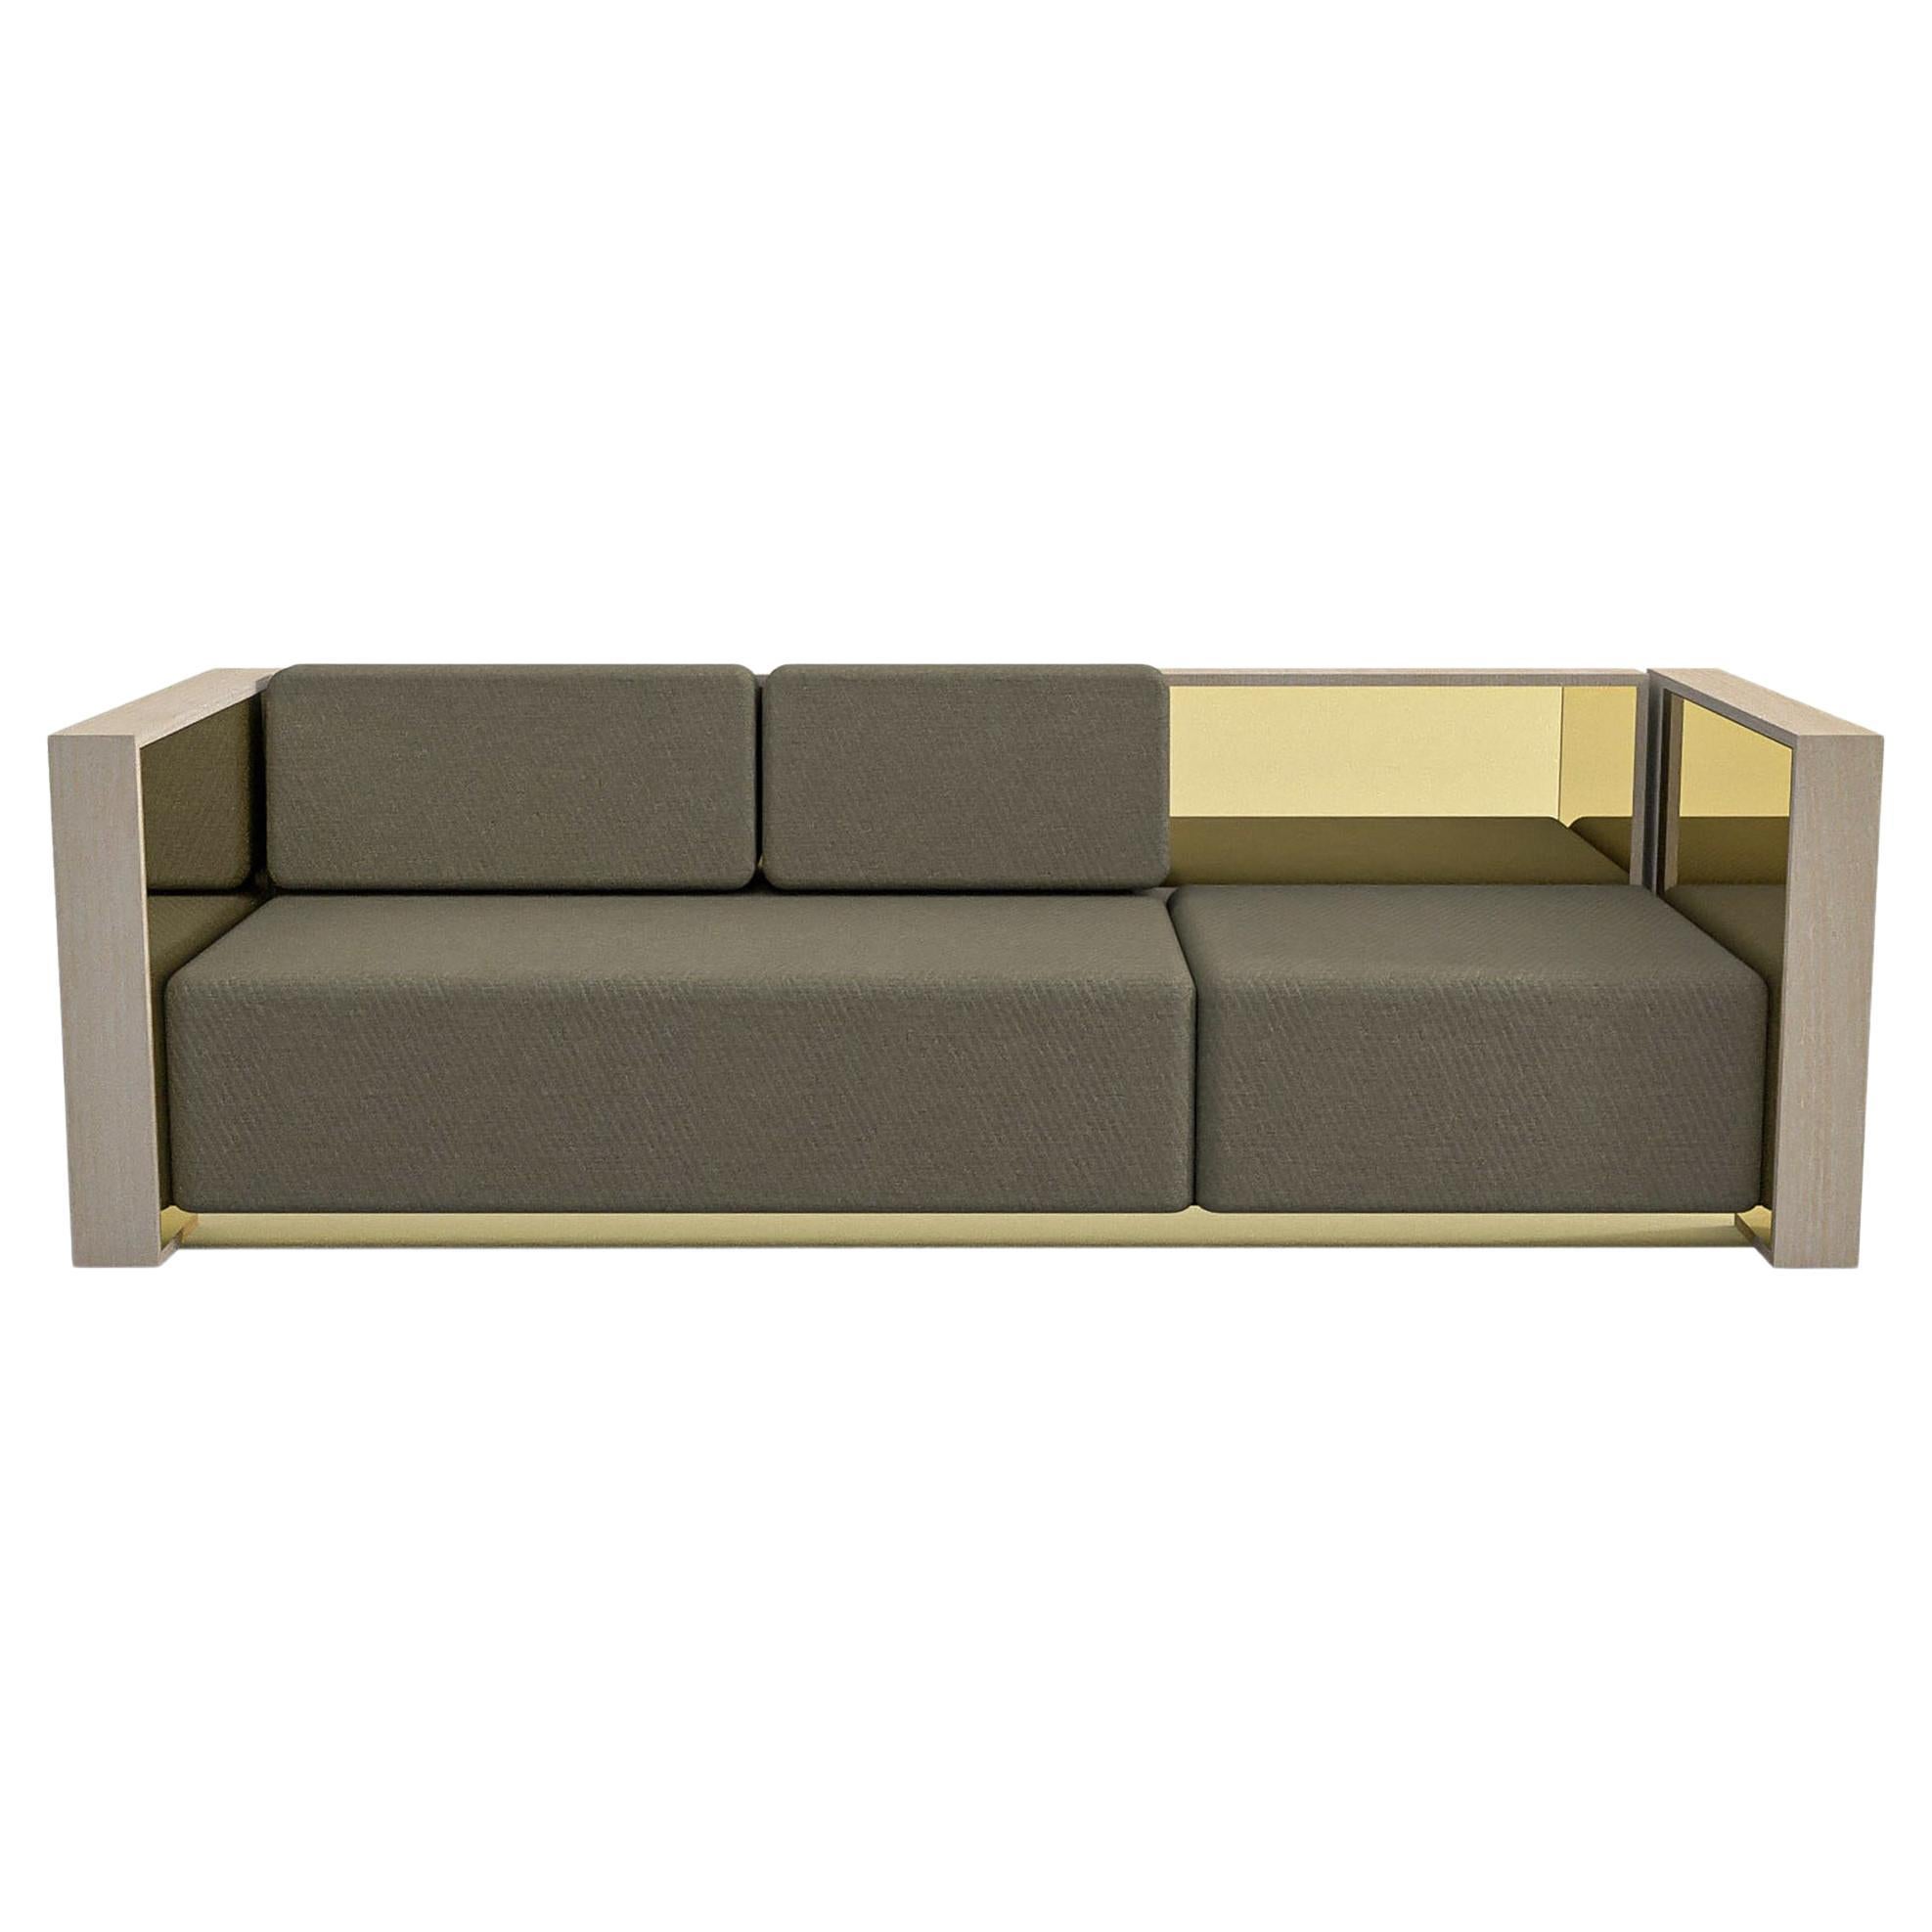 barh sofa in natural ash wood, brass details and brown upholstery - 3 seater For Sale